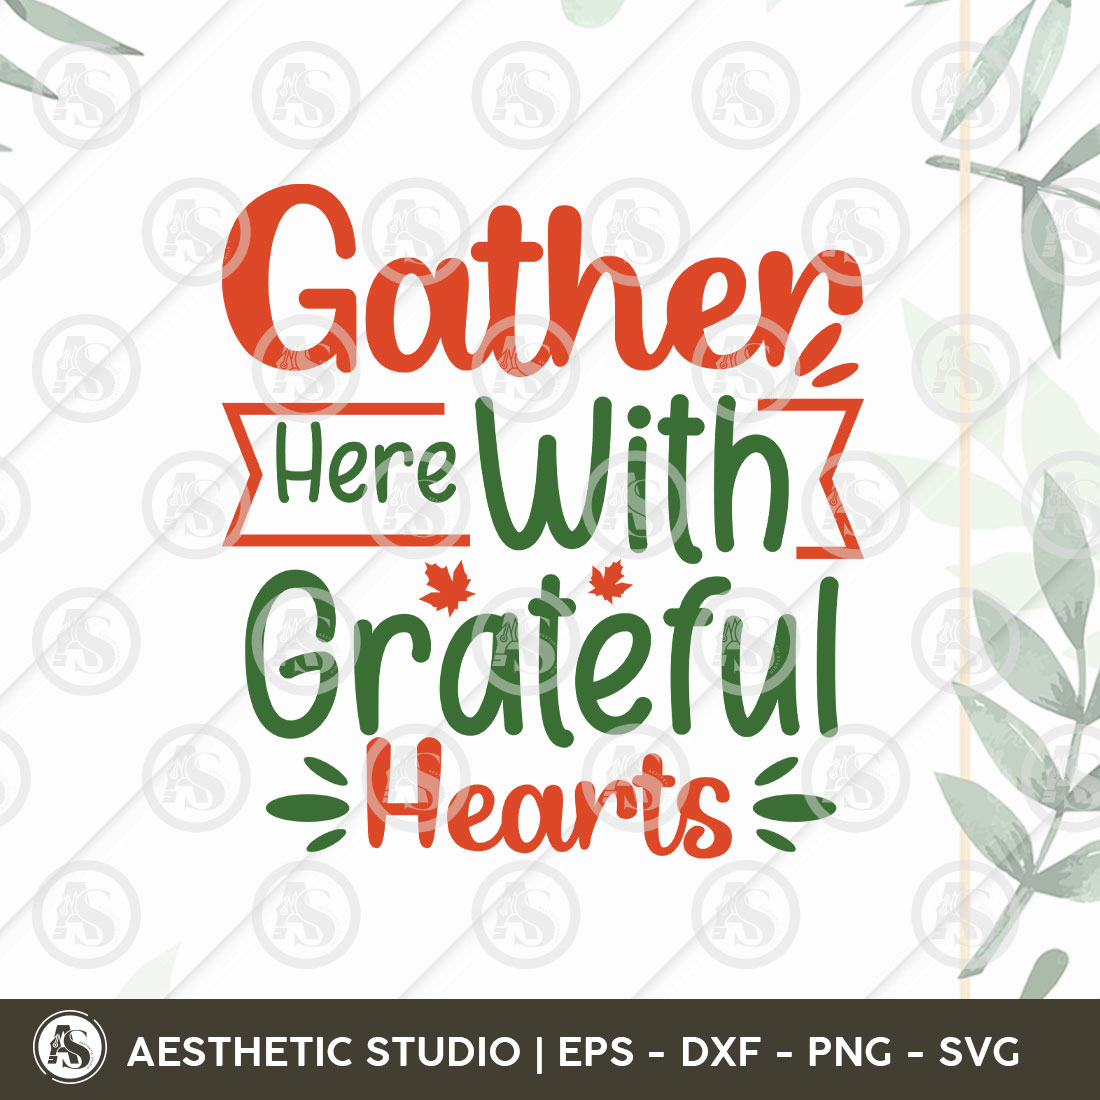 Gather Here With Grateful Hearts Svg, Thanksgiving Svg, Gift For Thanksgiving Shirt, Fall Svg, Autumn Svg, Thankful Svg, Pumpkin svg, Turkey svg, Gobble Svg, Pumpkin Spice, Fall Leaves Svg, Fall Vibes Svg, Grateful svg, Thanksgiving Quote, Cut Files for Cricut, cover image.